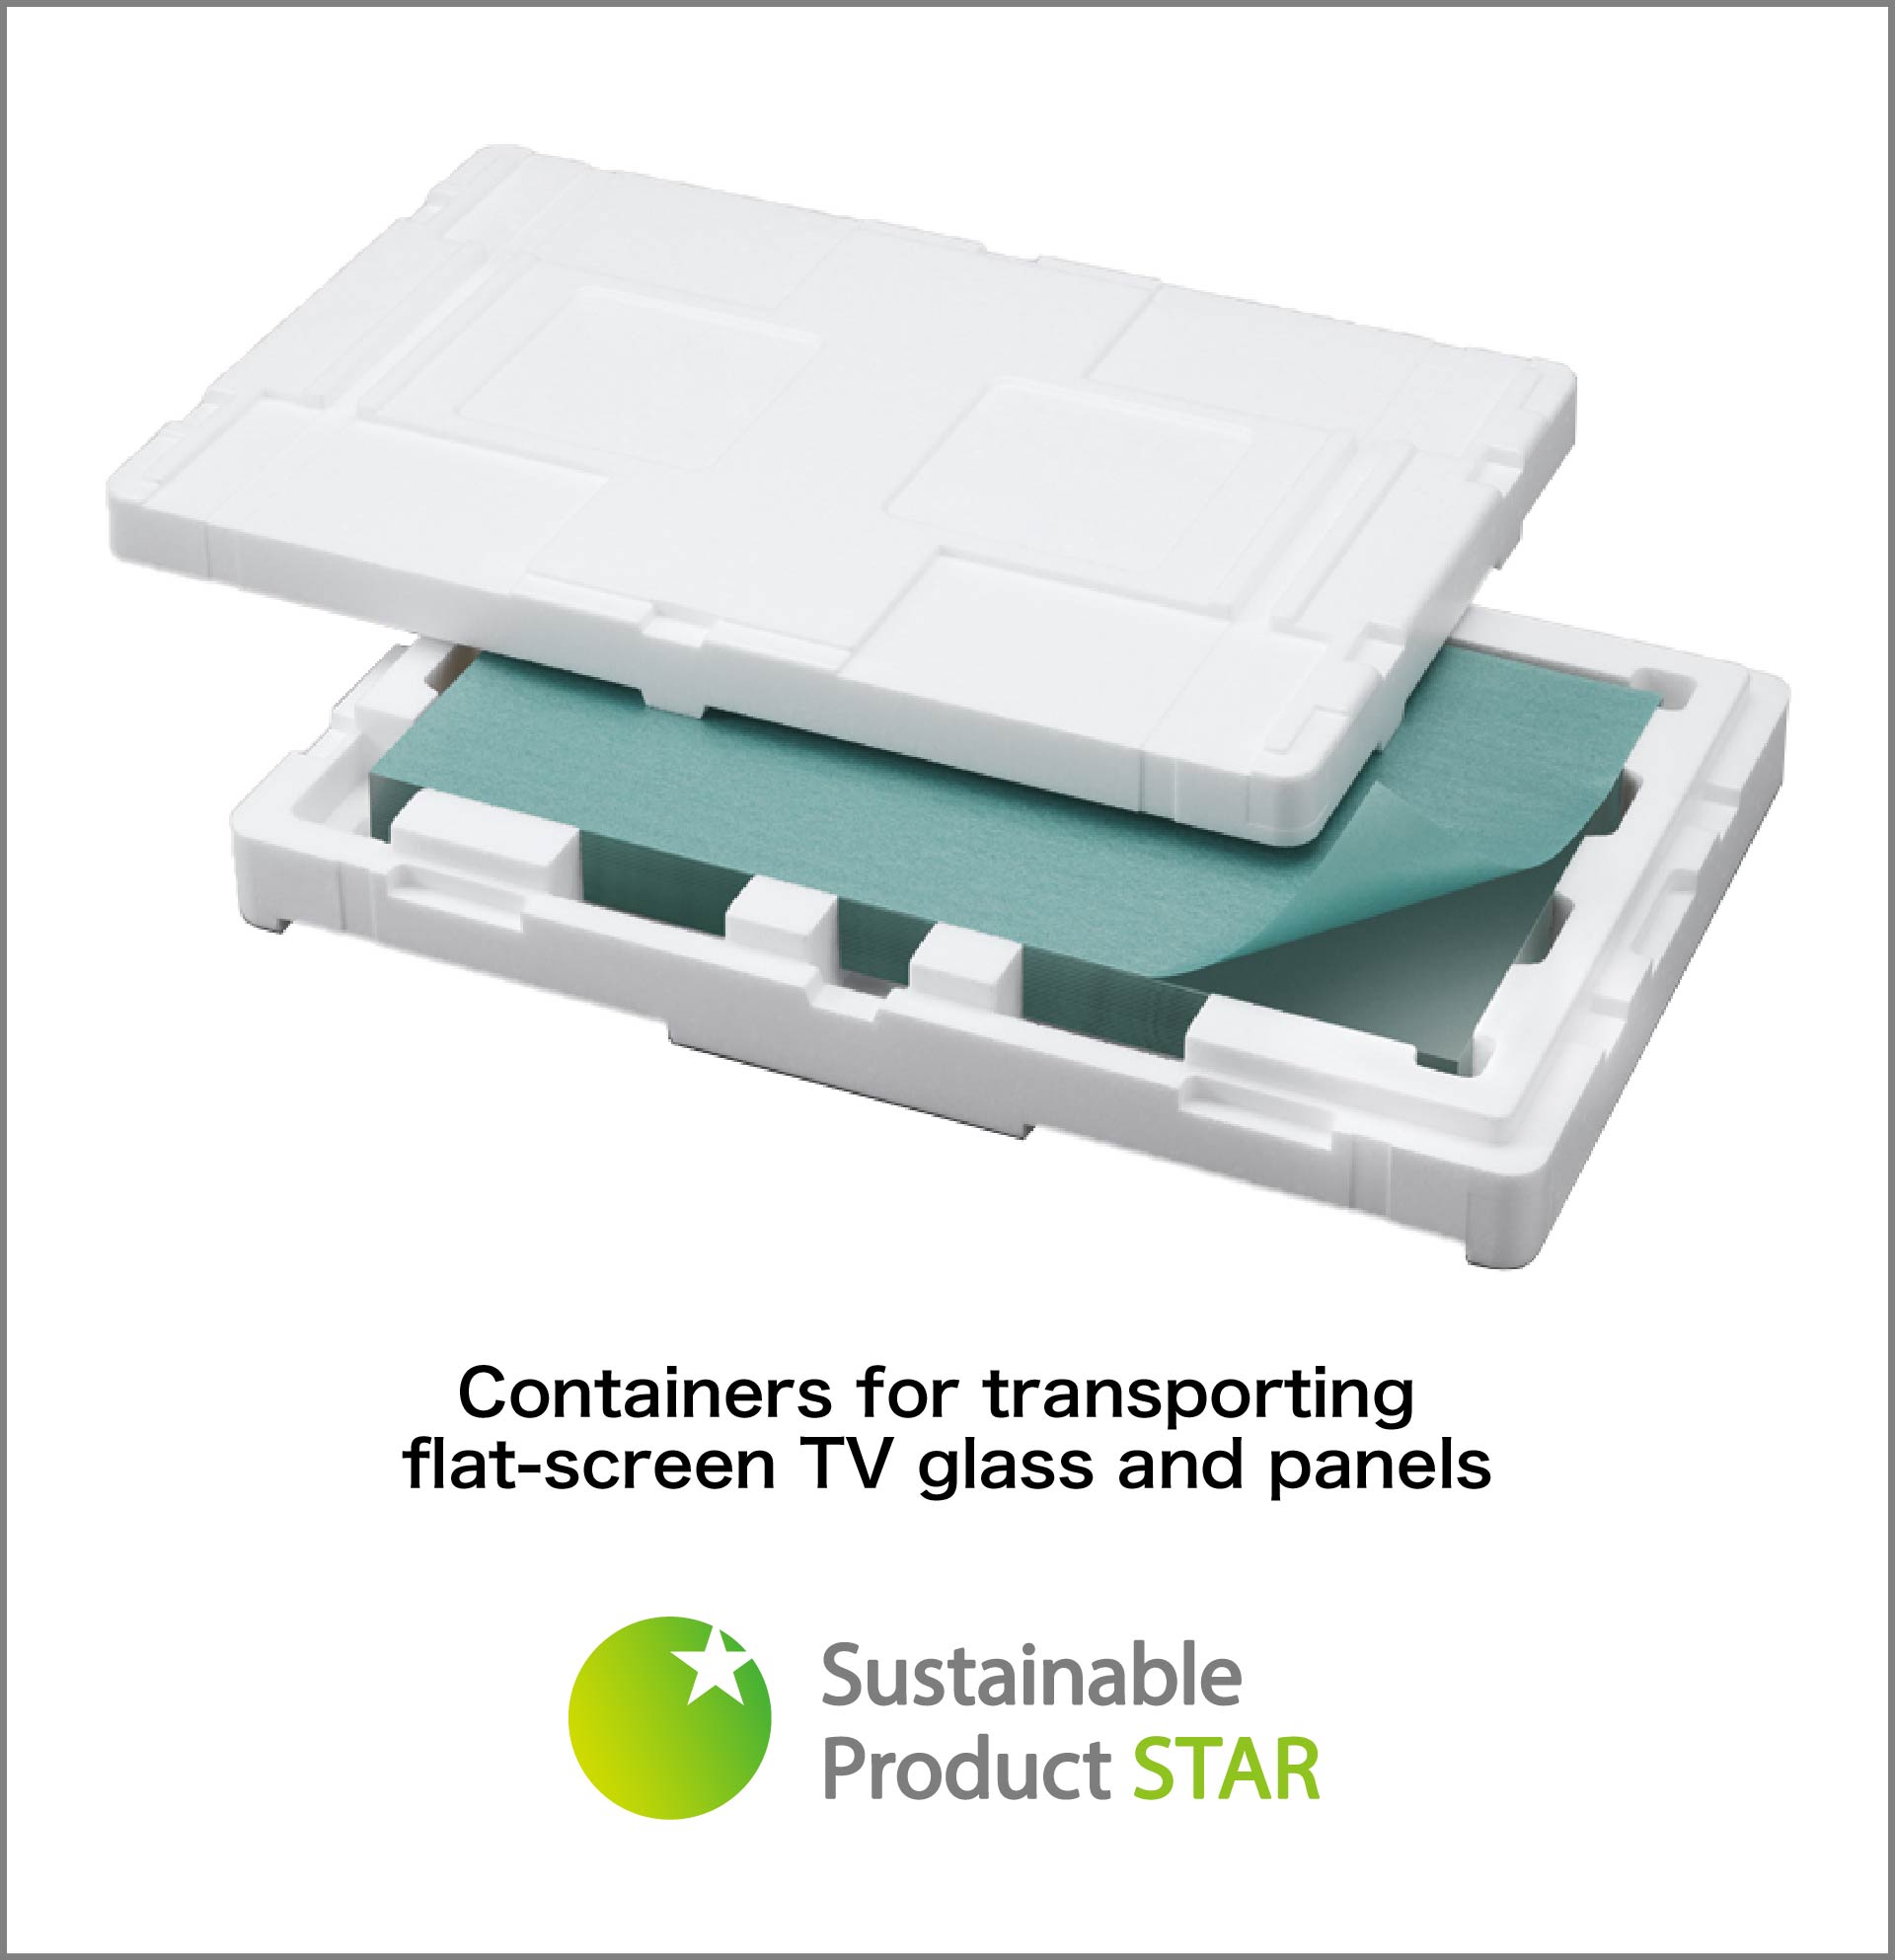 Containers for transporting flat-screen TV glass and panels